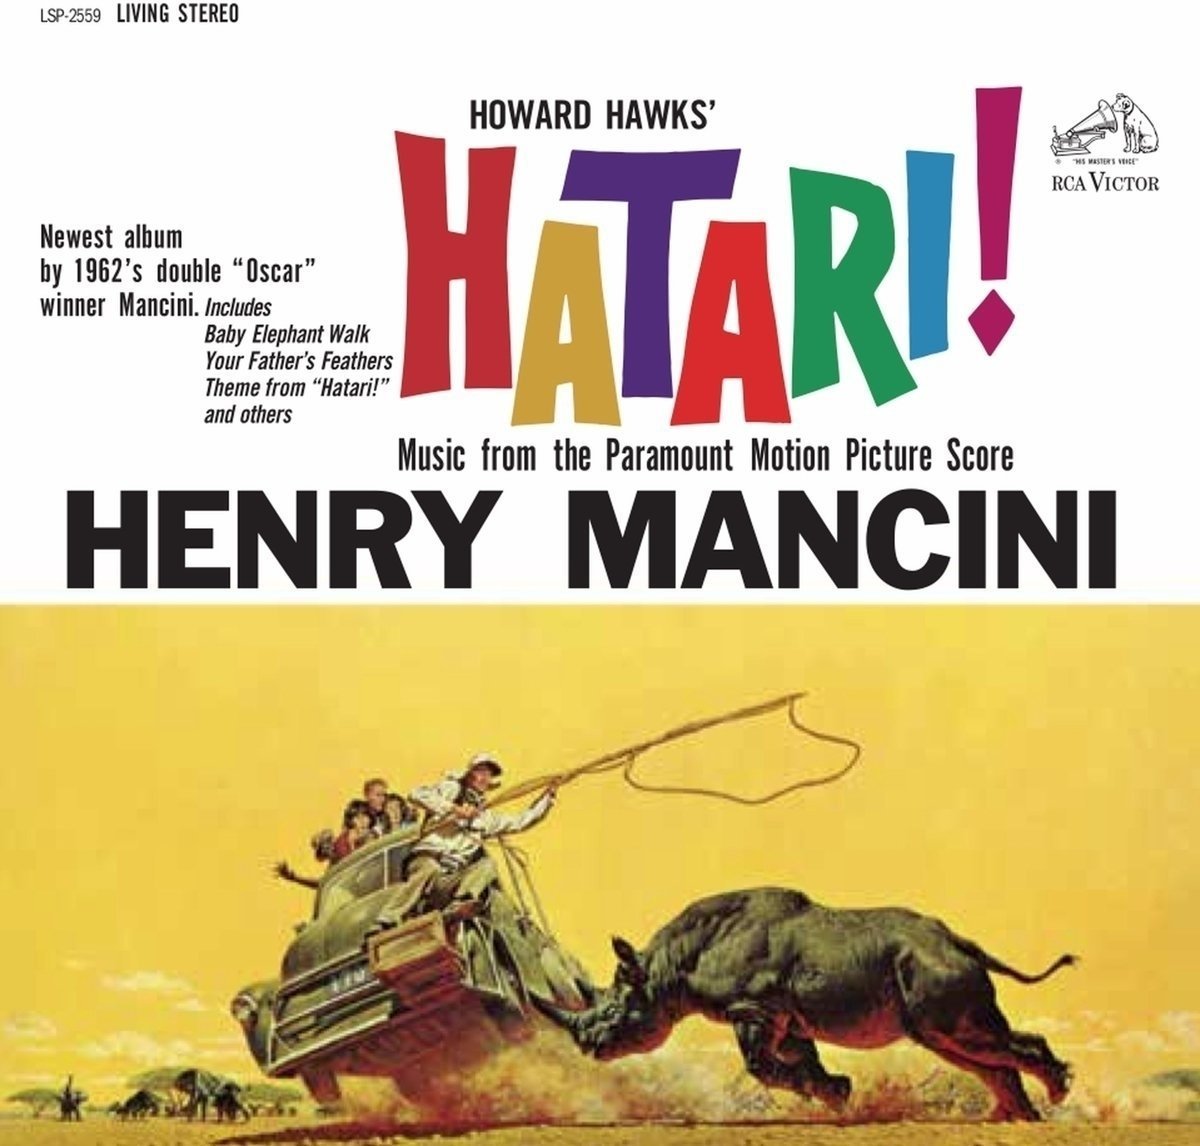 Henry Mancini - Hatari! - Music from the Paramount Motion Picture Score (LP) Henry Mancini